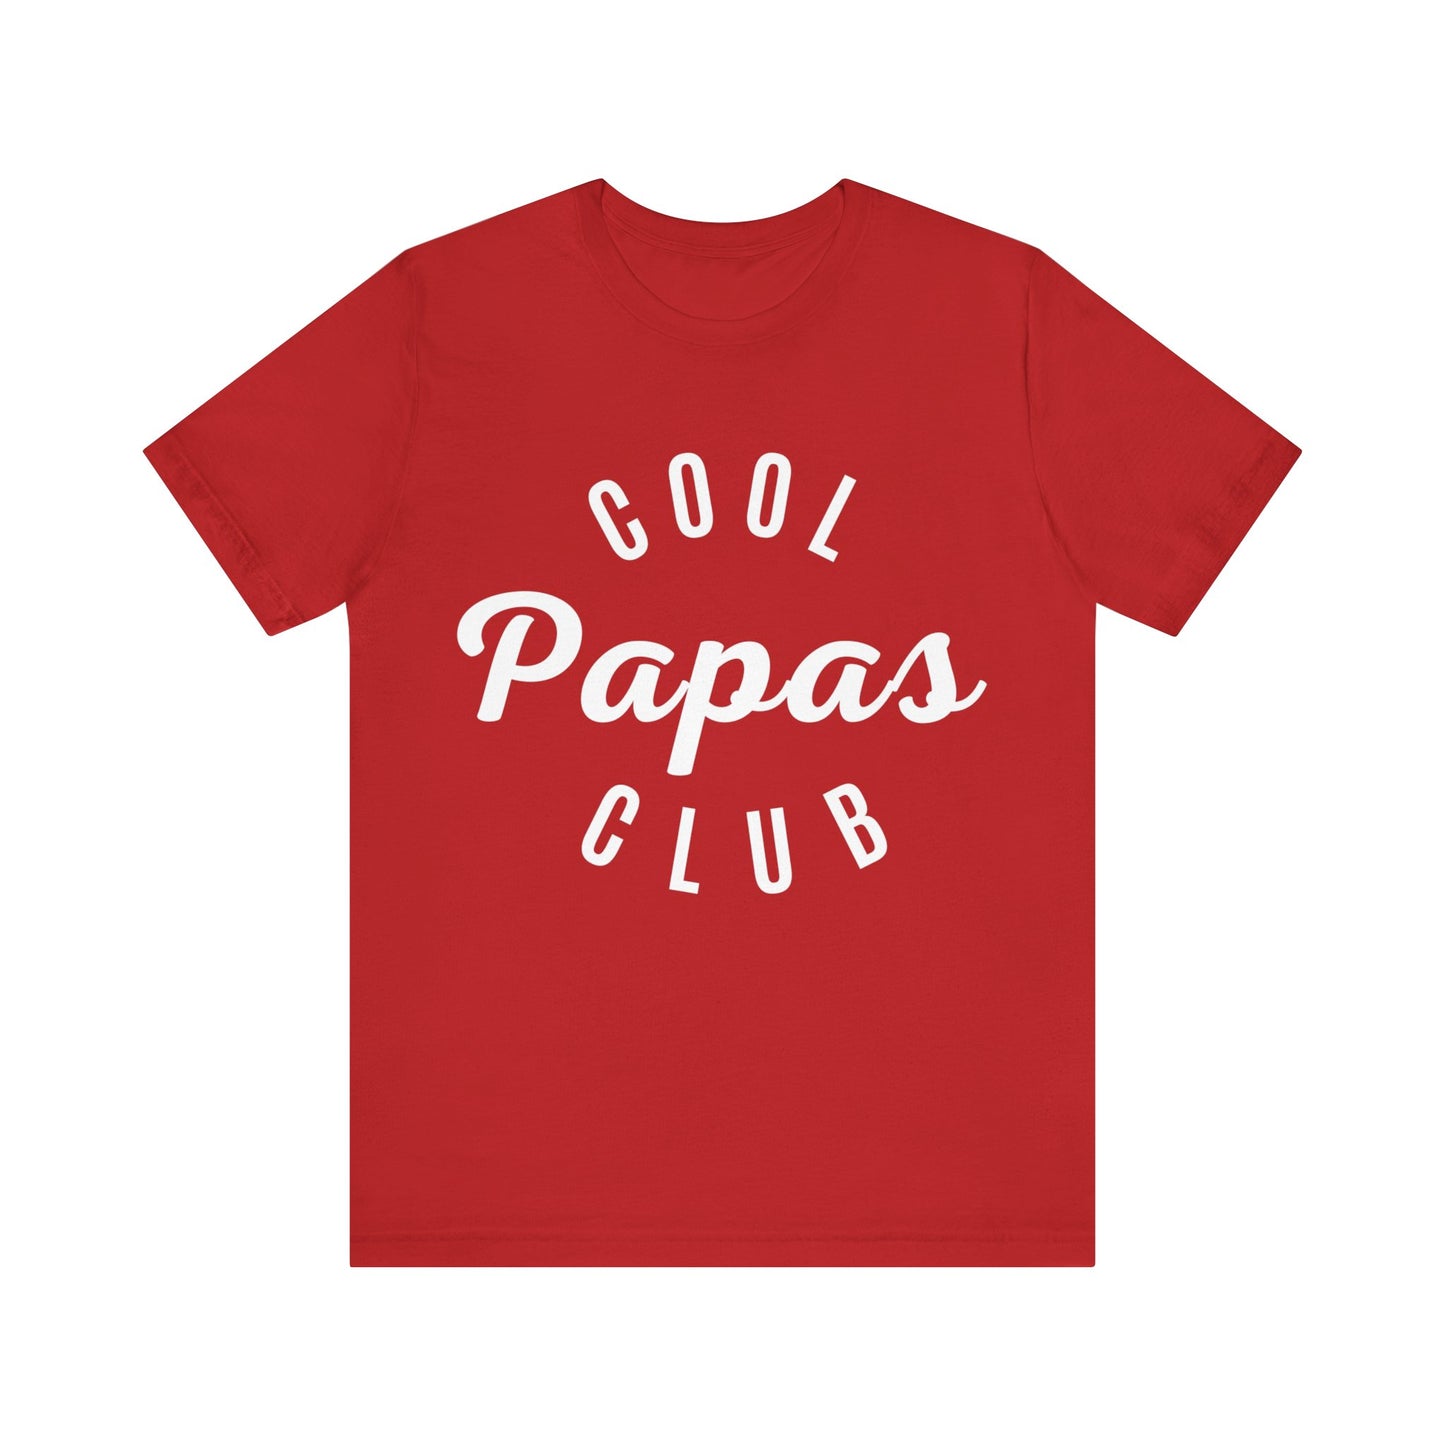 Cool Papas Club Shirt, Pregnancy Announcement TShirt for Dad , Cool Dad T-Shirt for New Dad, Funny Gift for Dad to Be, T1063